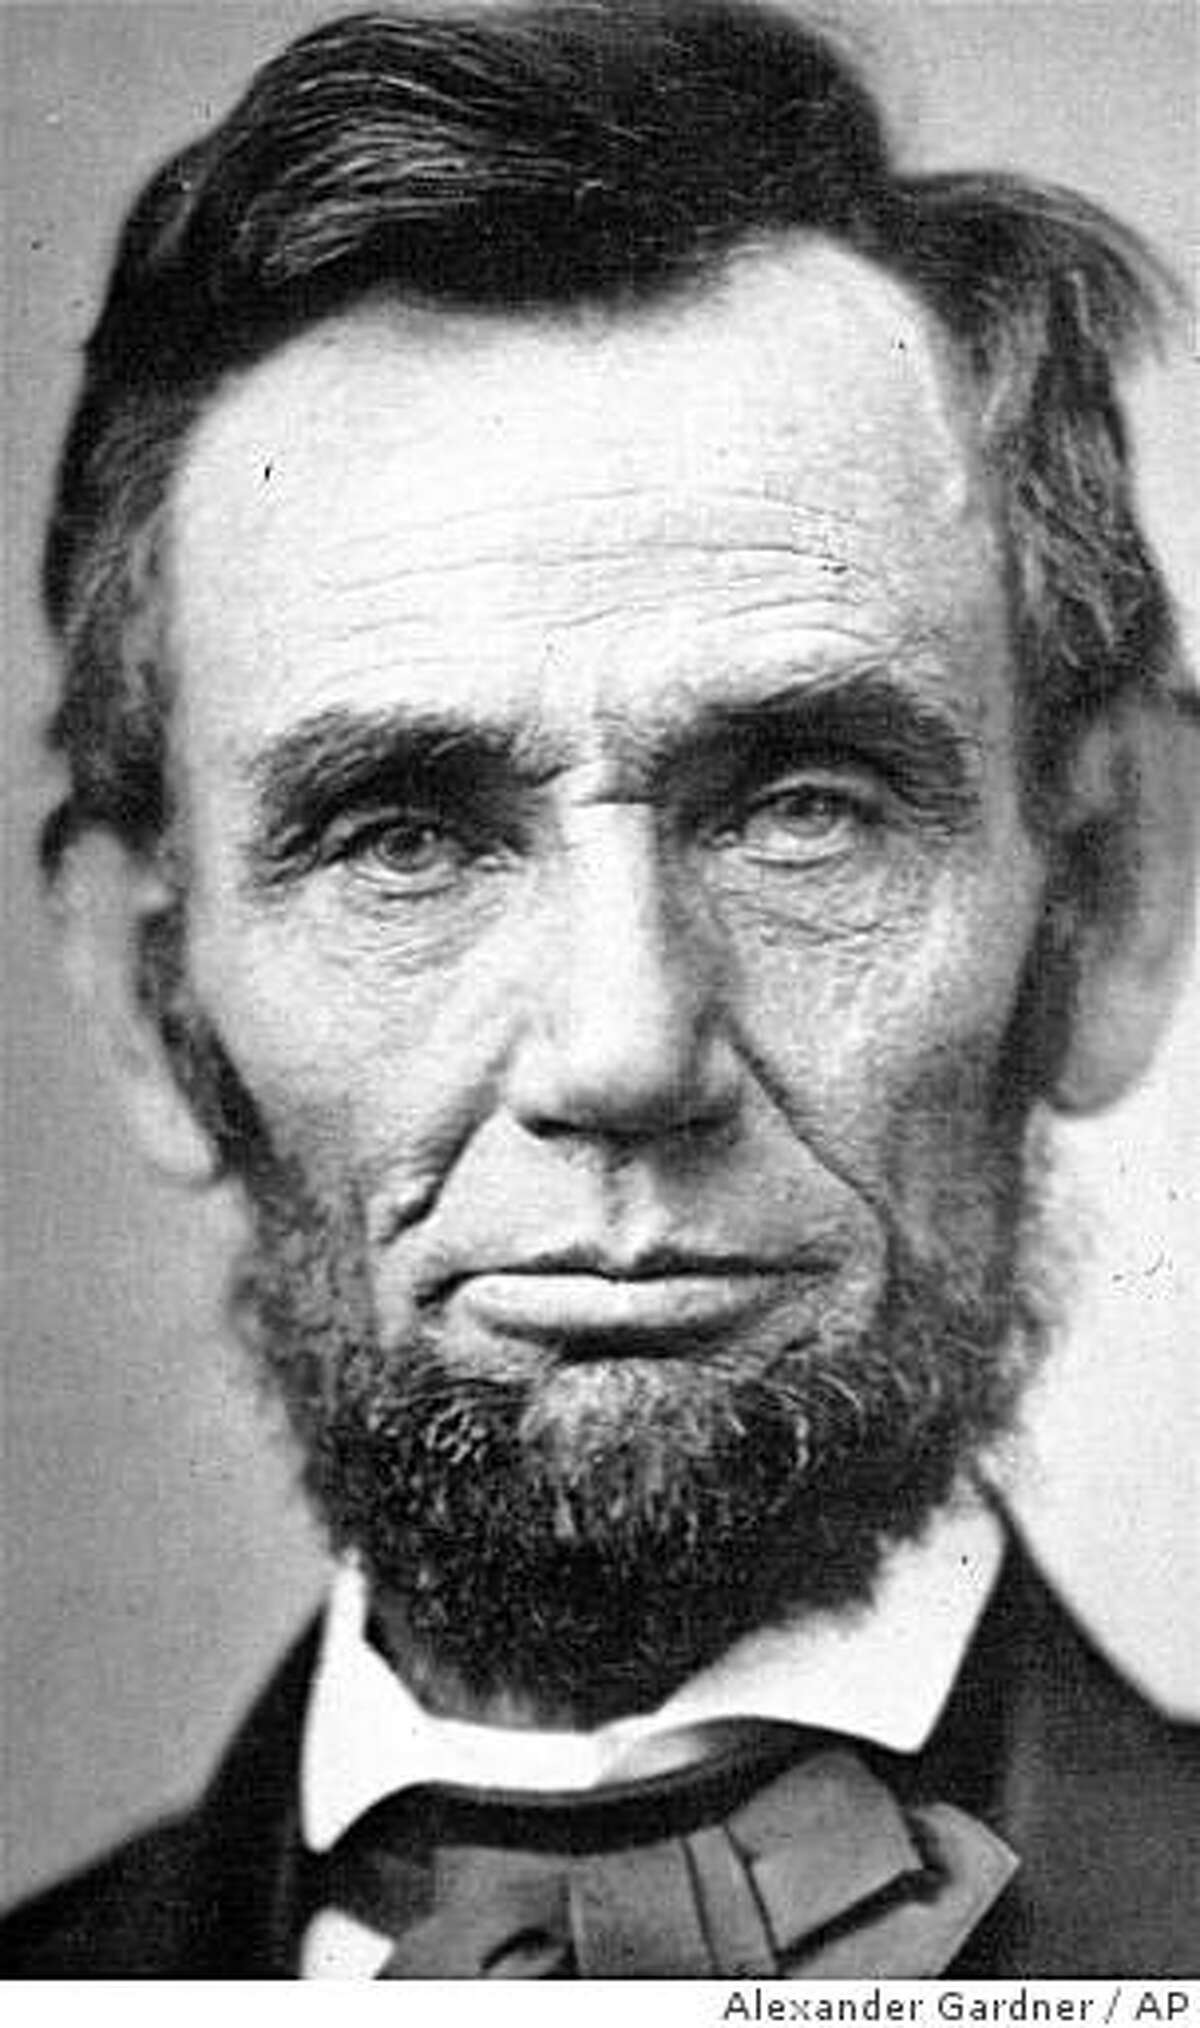 **ADVANCE FOR SUNDAY, FEB. 8** **FILE** Abraham Lincoln, is shown in this November 8, 1863 file photo. Lincoln sat for 33 photographers and 127 portraits, 37 of them by Gardner - "Mr. Lincoln's Cameraman". (AP Photo/Alexander Gardner, file)